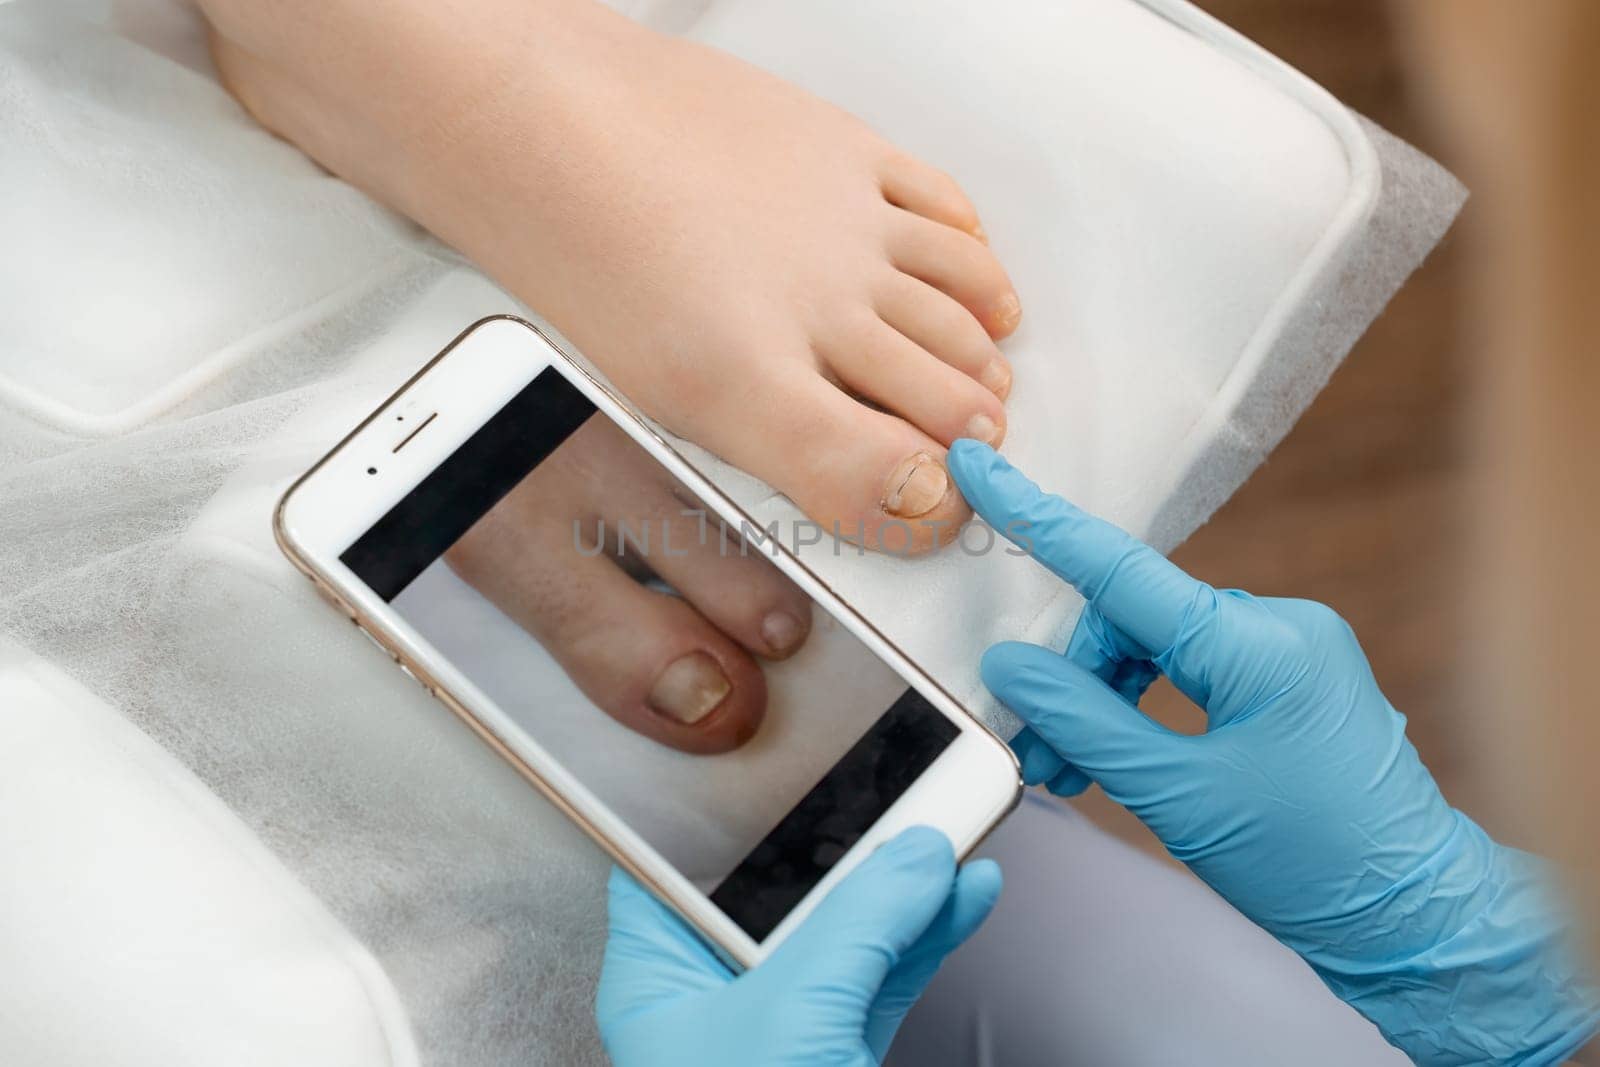 Podologist compares the results after ingrown toenails removal using a photo on a smartphone. by vladimka